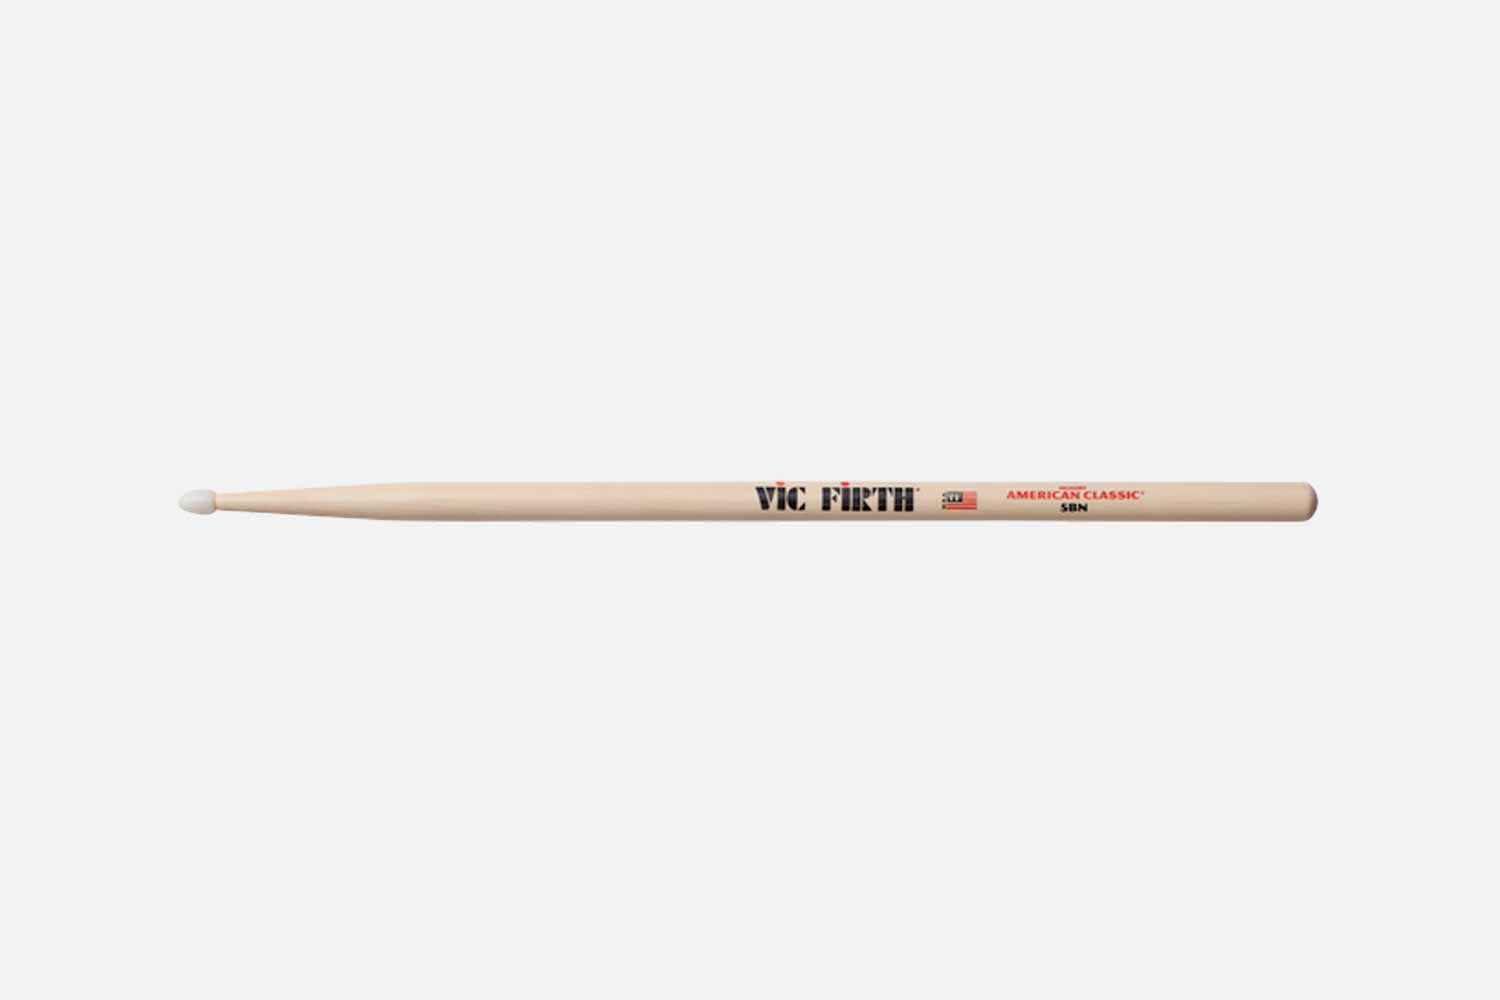 Vic firth 5BN American Classic Hickory (5461333541028)